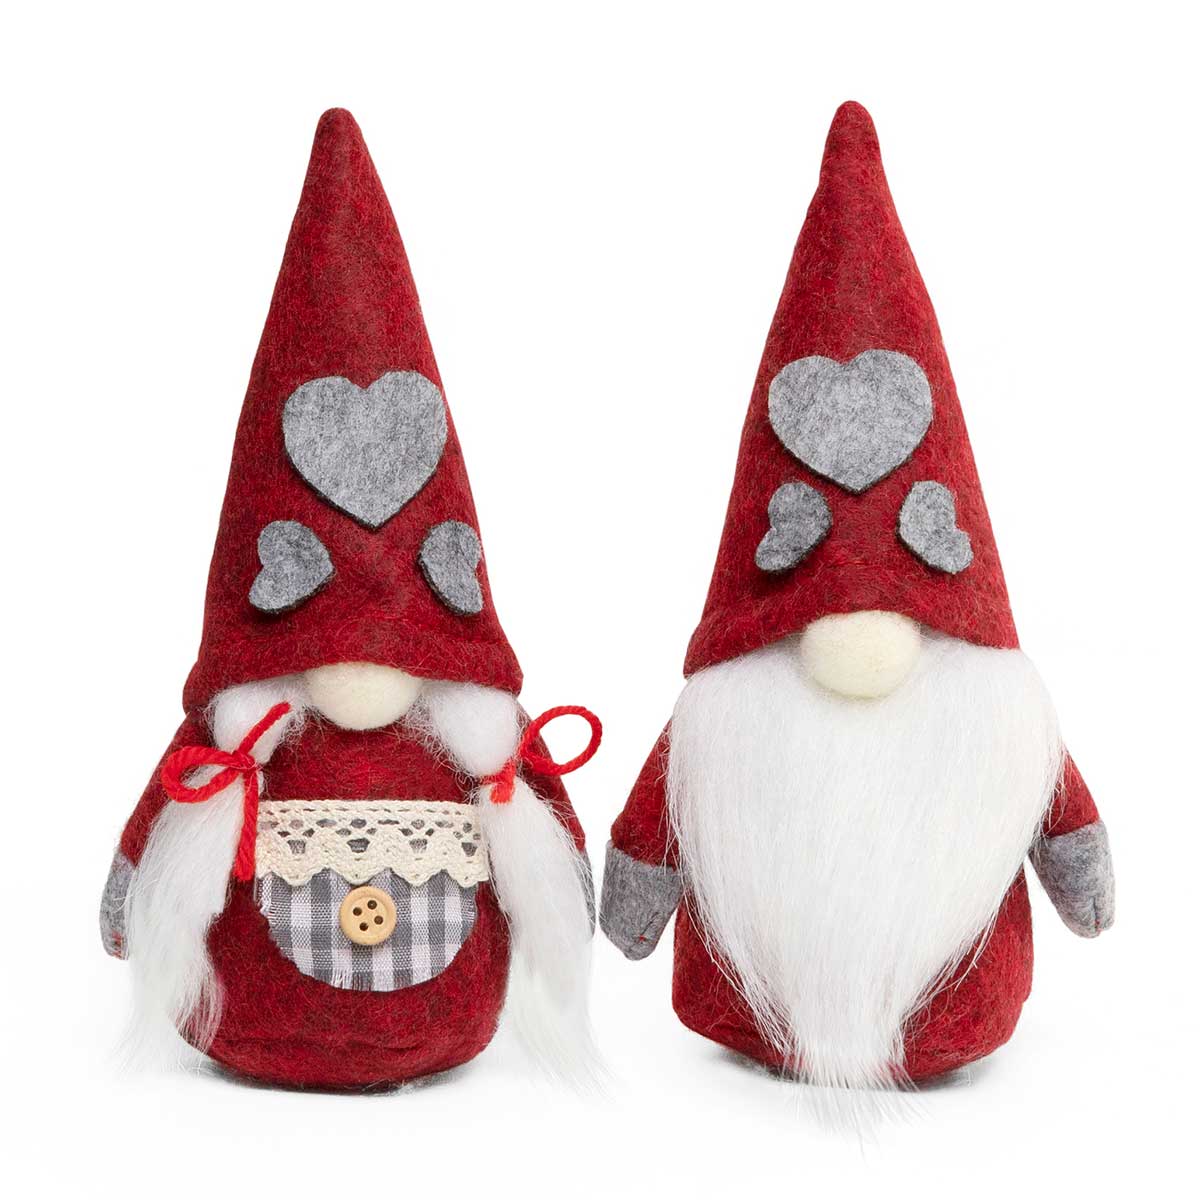 !SWEDISH GNOME COUPLE RED WITH HEART 6"